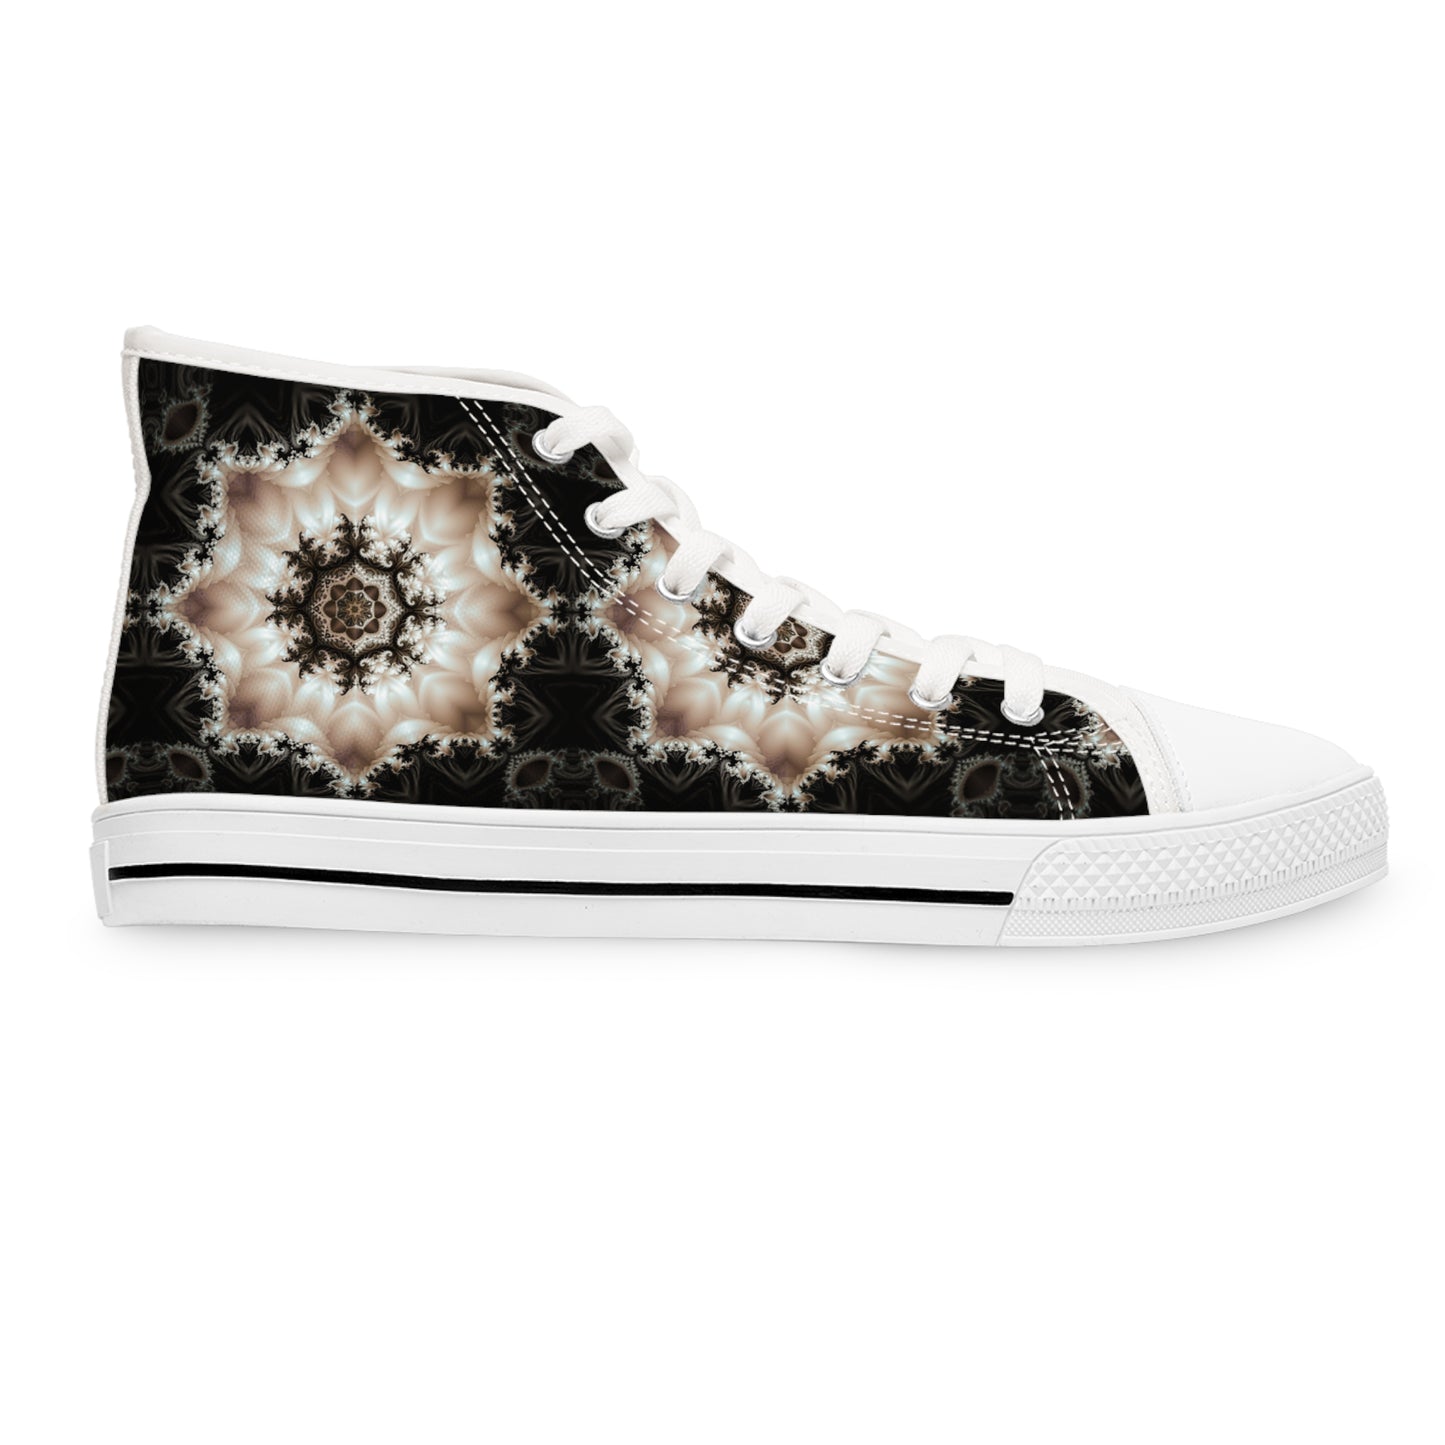 "Duality V2" WOMEN'S HIGH TOP SNEAKERS